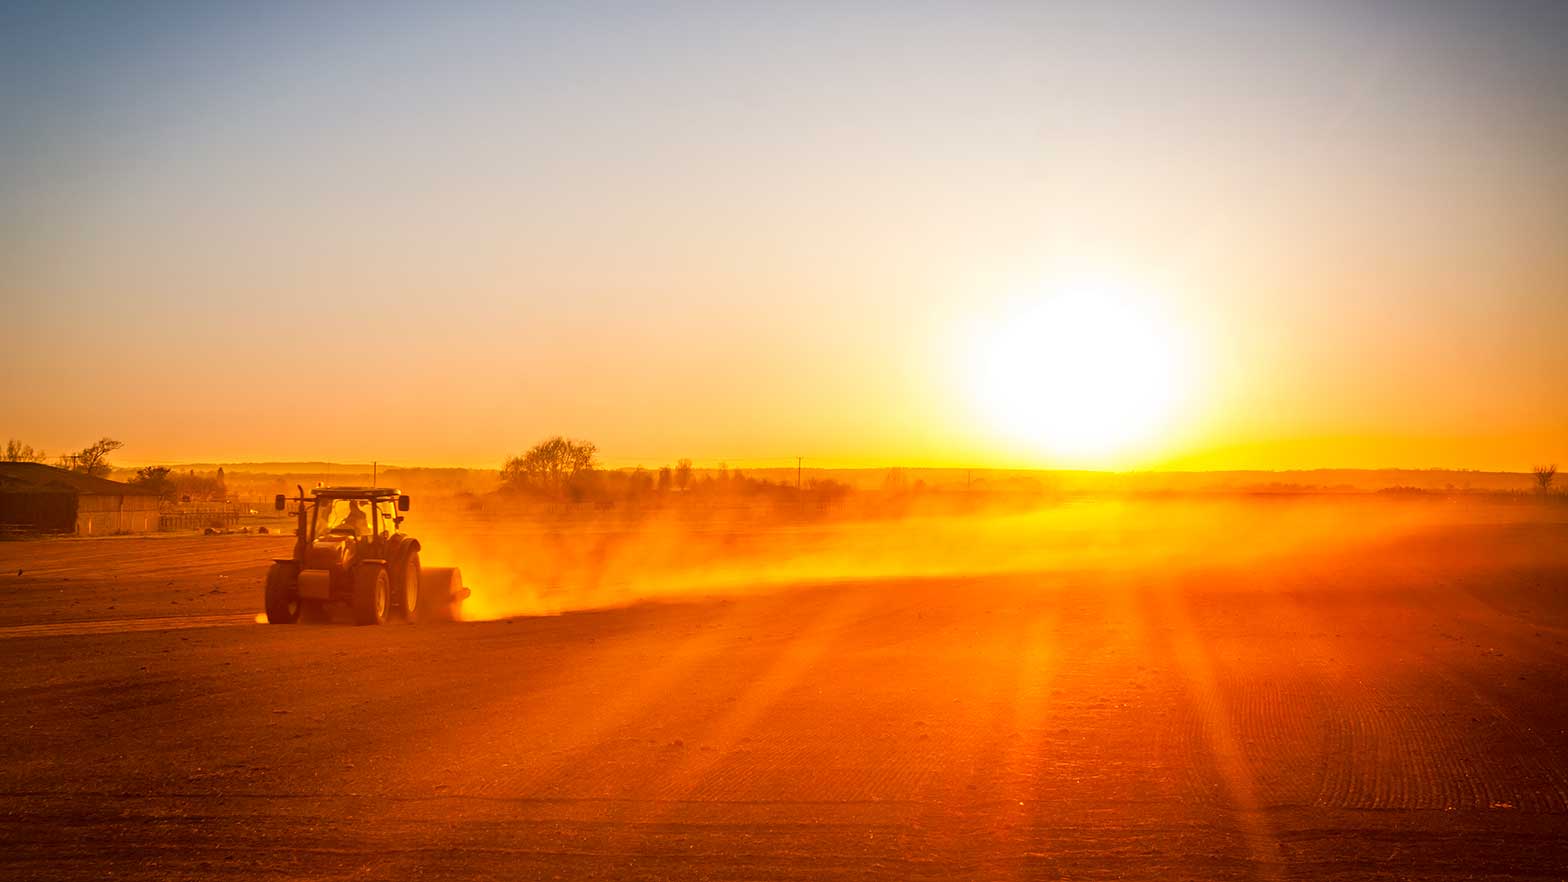 image of a farm tractor driving as the sun is setting over the fields